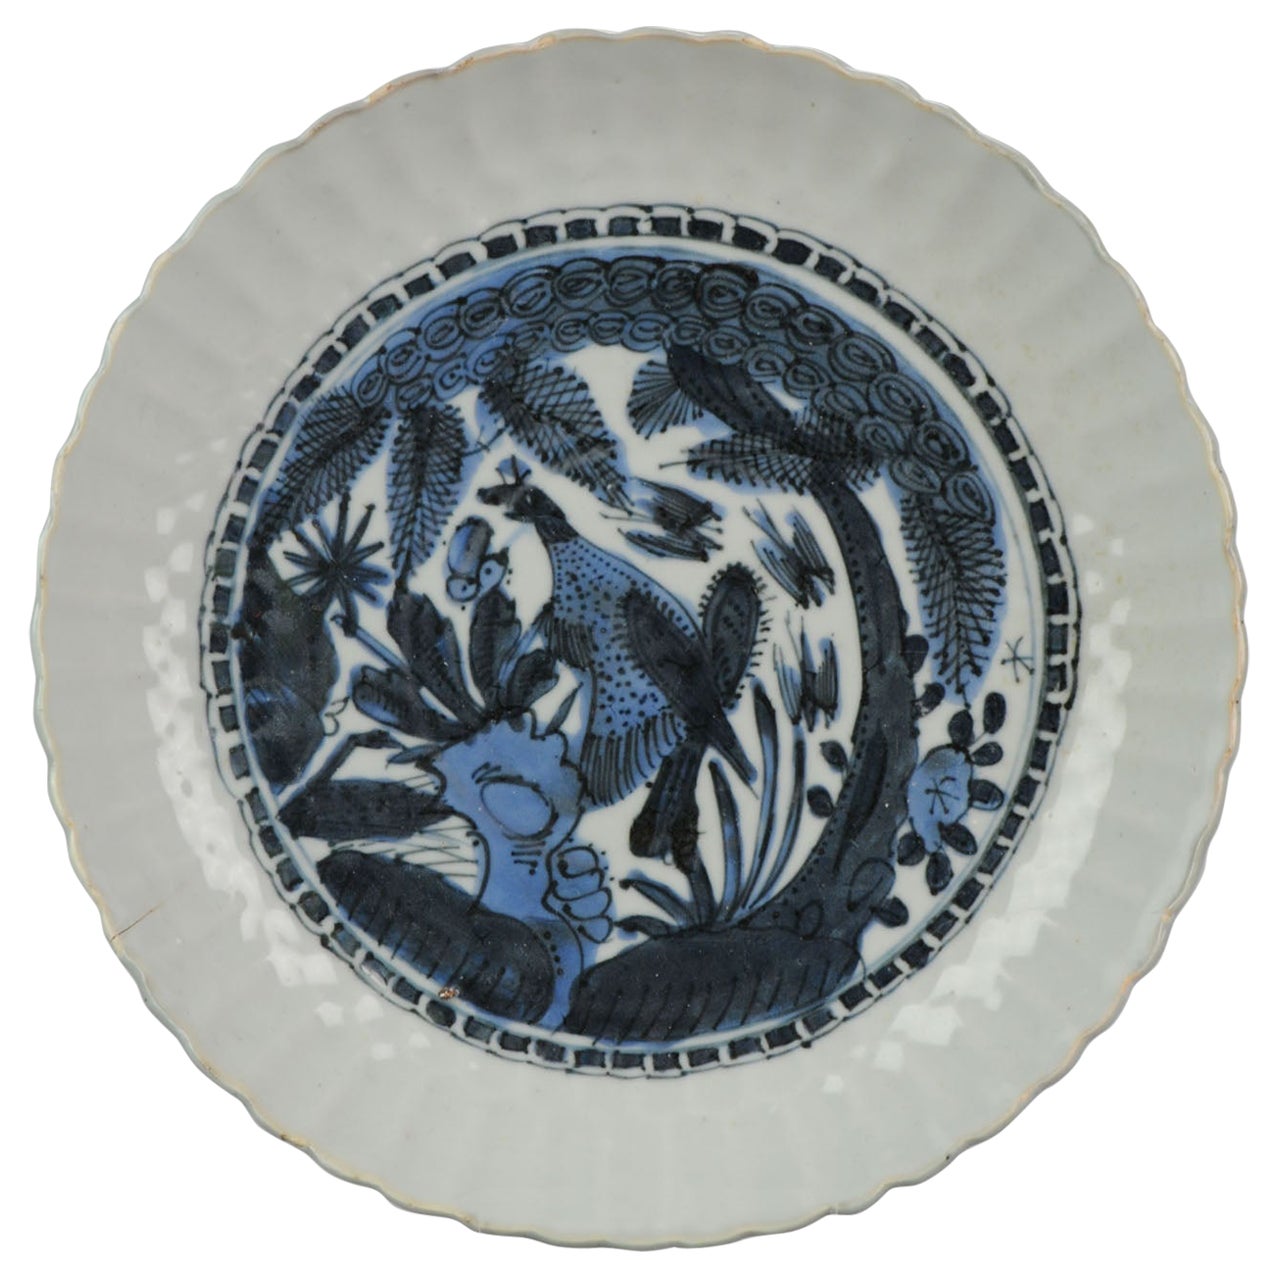 Antique Chinese Kraak Porcelain Dish with Bird of Prey, 17th Century